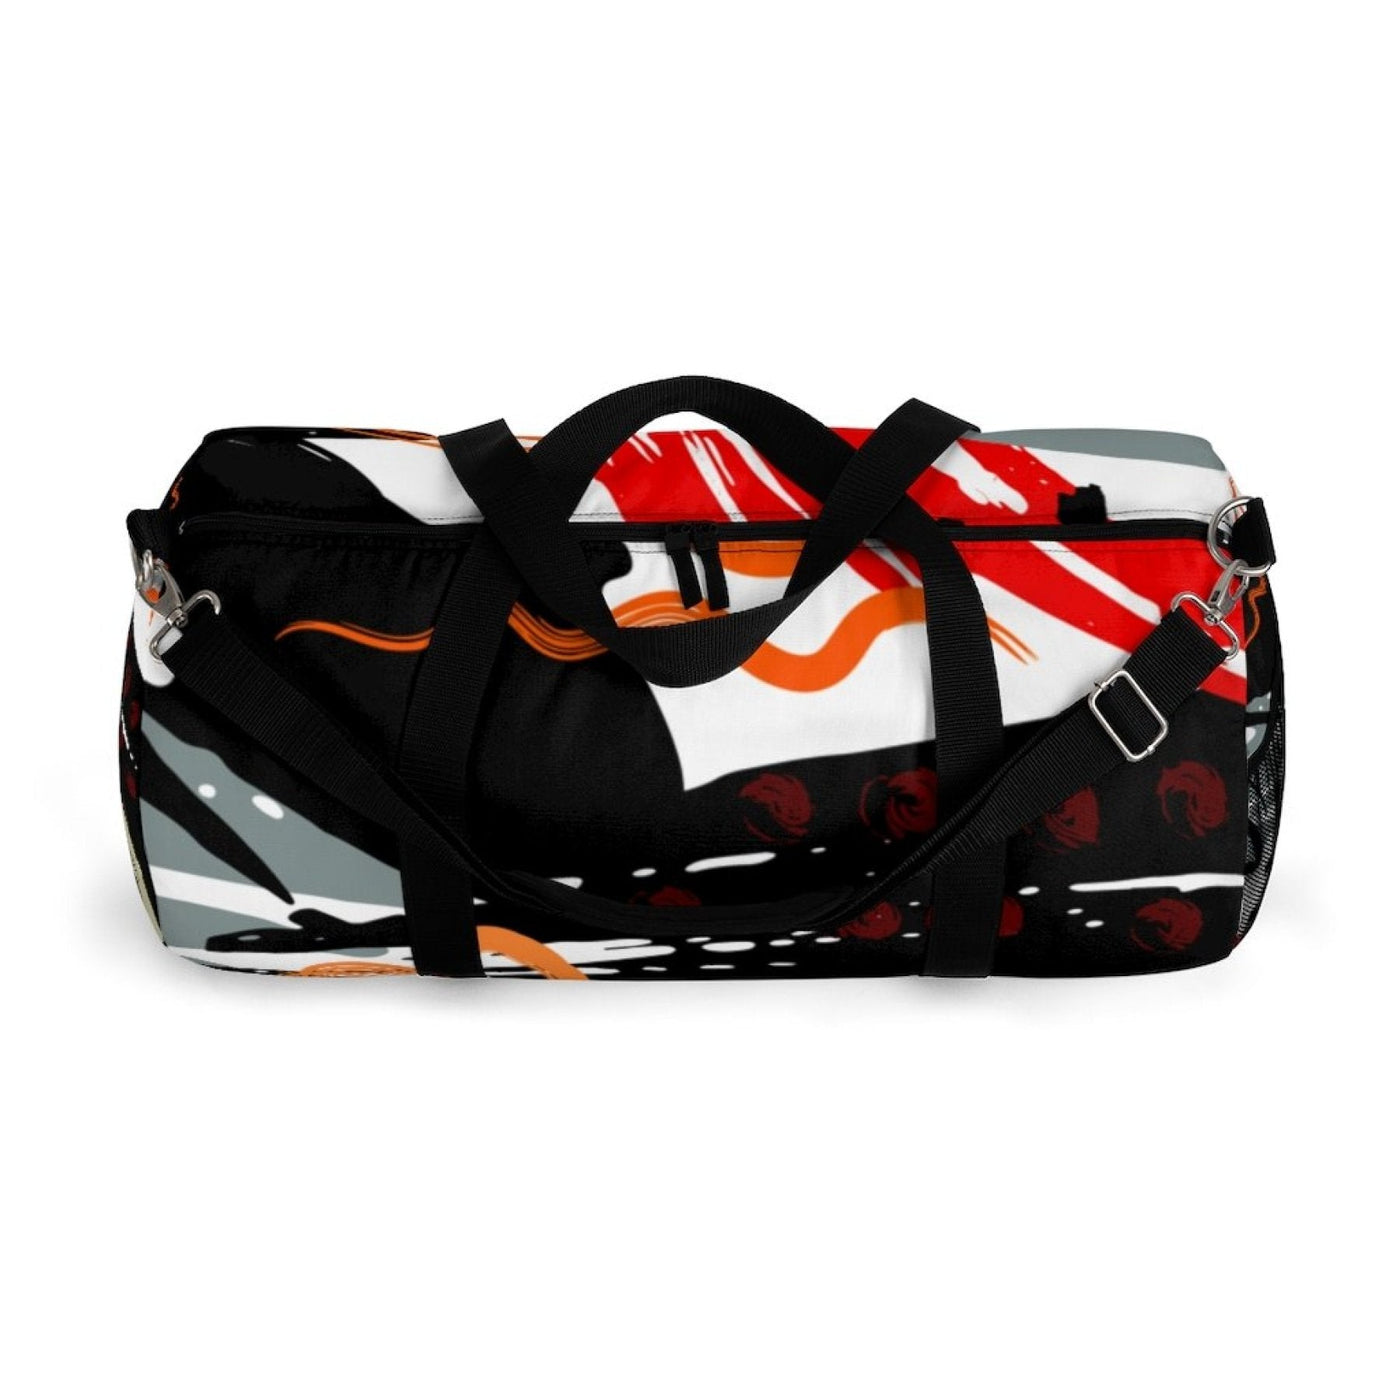 Duffel Bag Carry On Luggage Multicolor - Bags | Duffel Bags